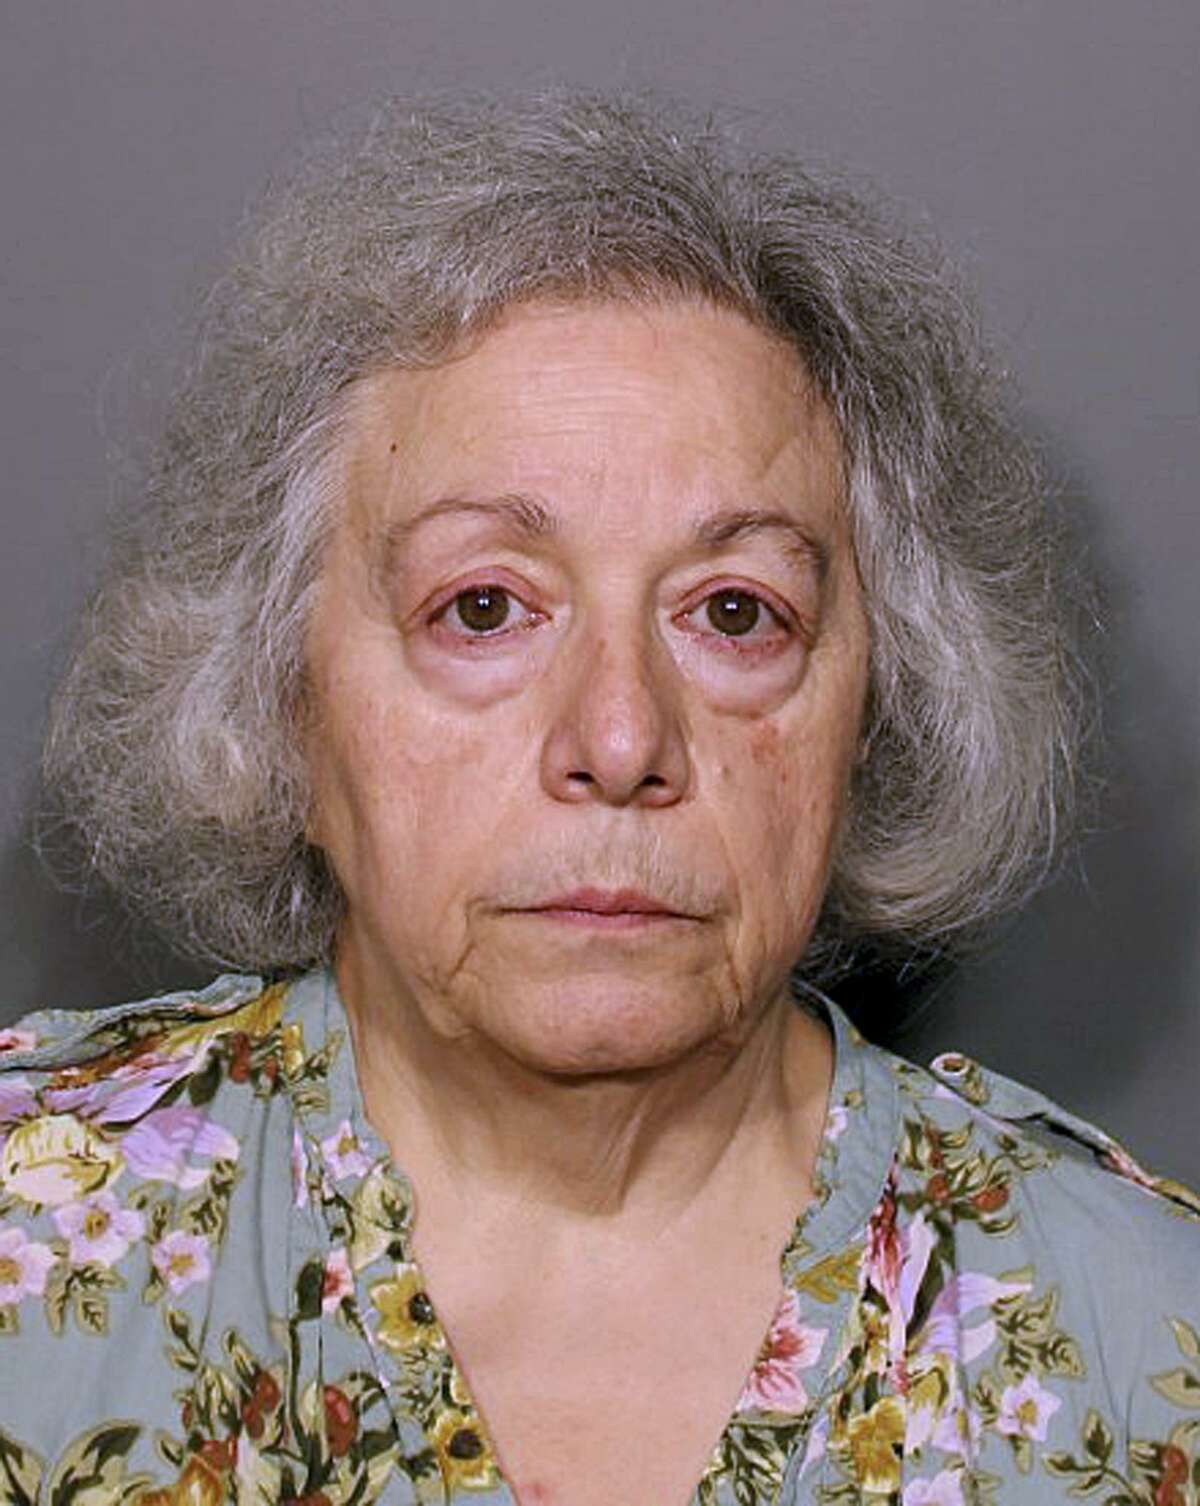 This booking photo released Monday, Aug. 13, 2018, by the New Canaan Police Department shows Marie Wilson, of Wilton, Conn., a former cafeteria worker who along with her sister Joanne Pascarelli was charged with stealing nearly a half-million dollars from New Canaan, Conn., schools over the last five years. (New Canaan Police Department via AP)